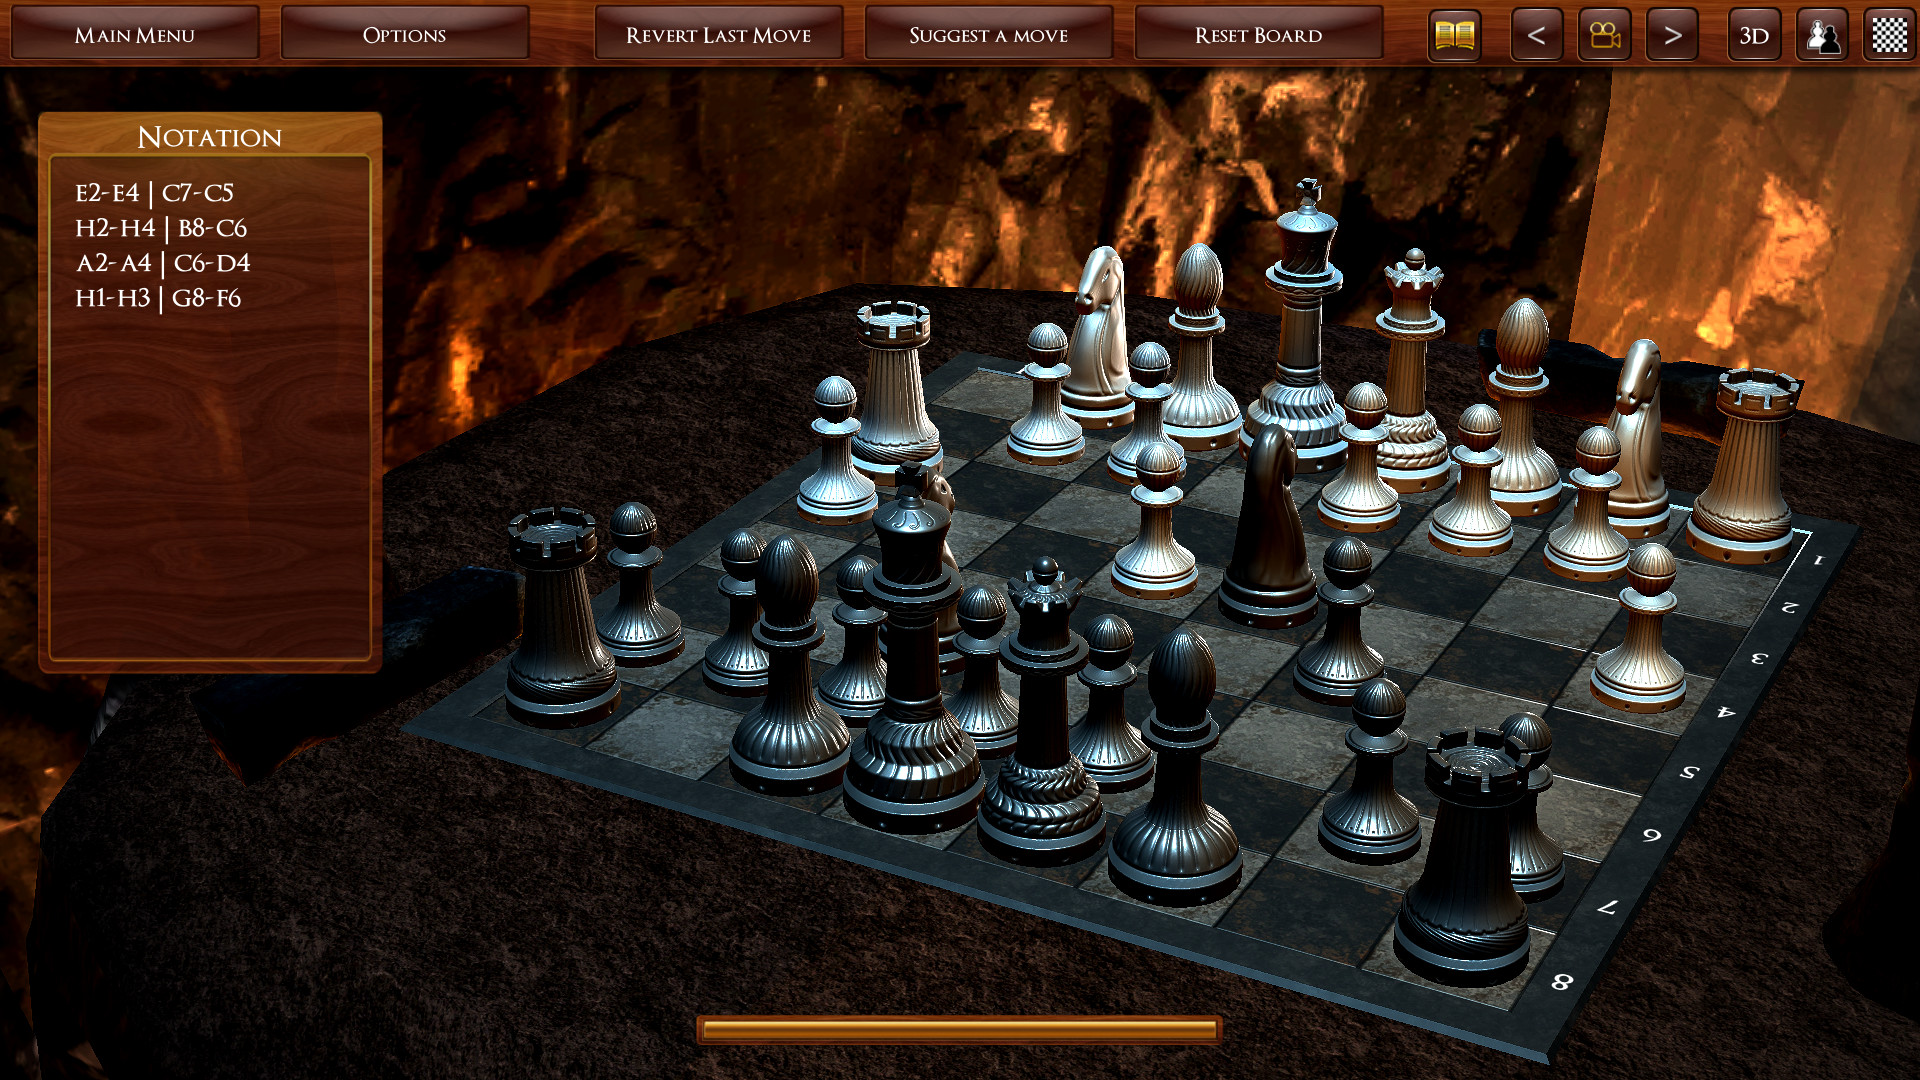 3D Chess Game for Windows 10 (Windows) - Download